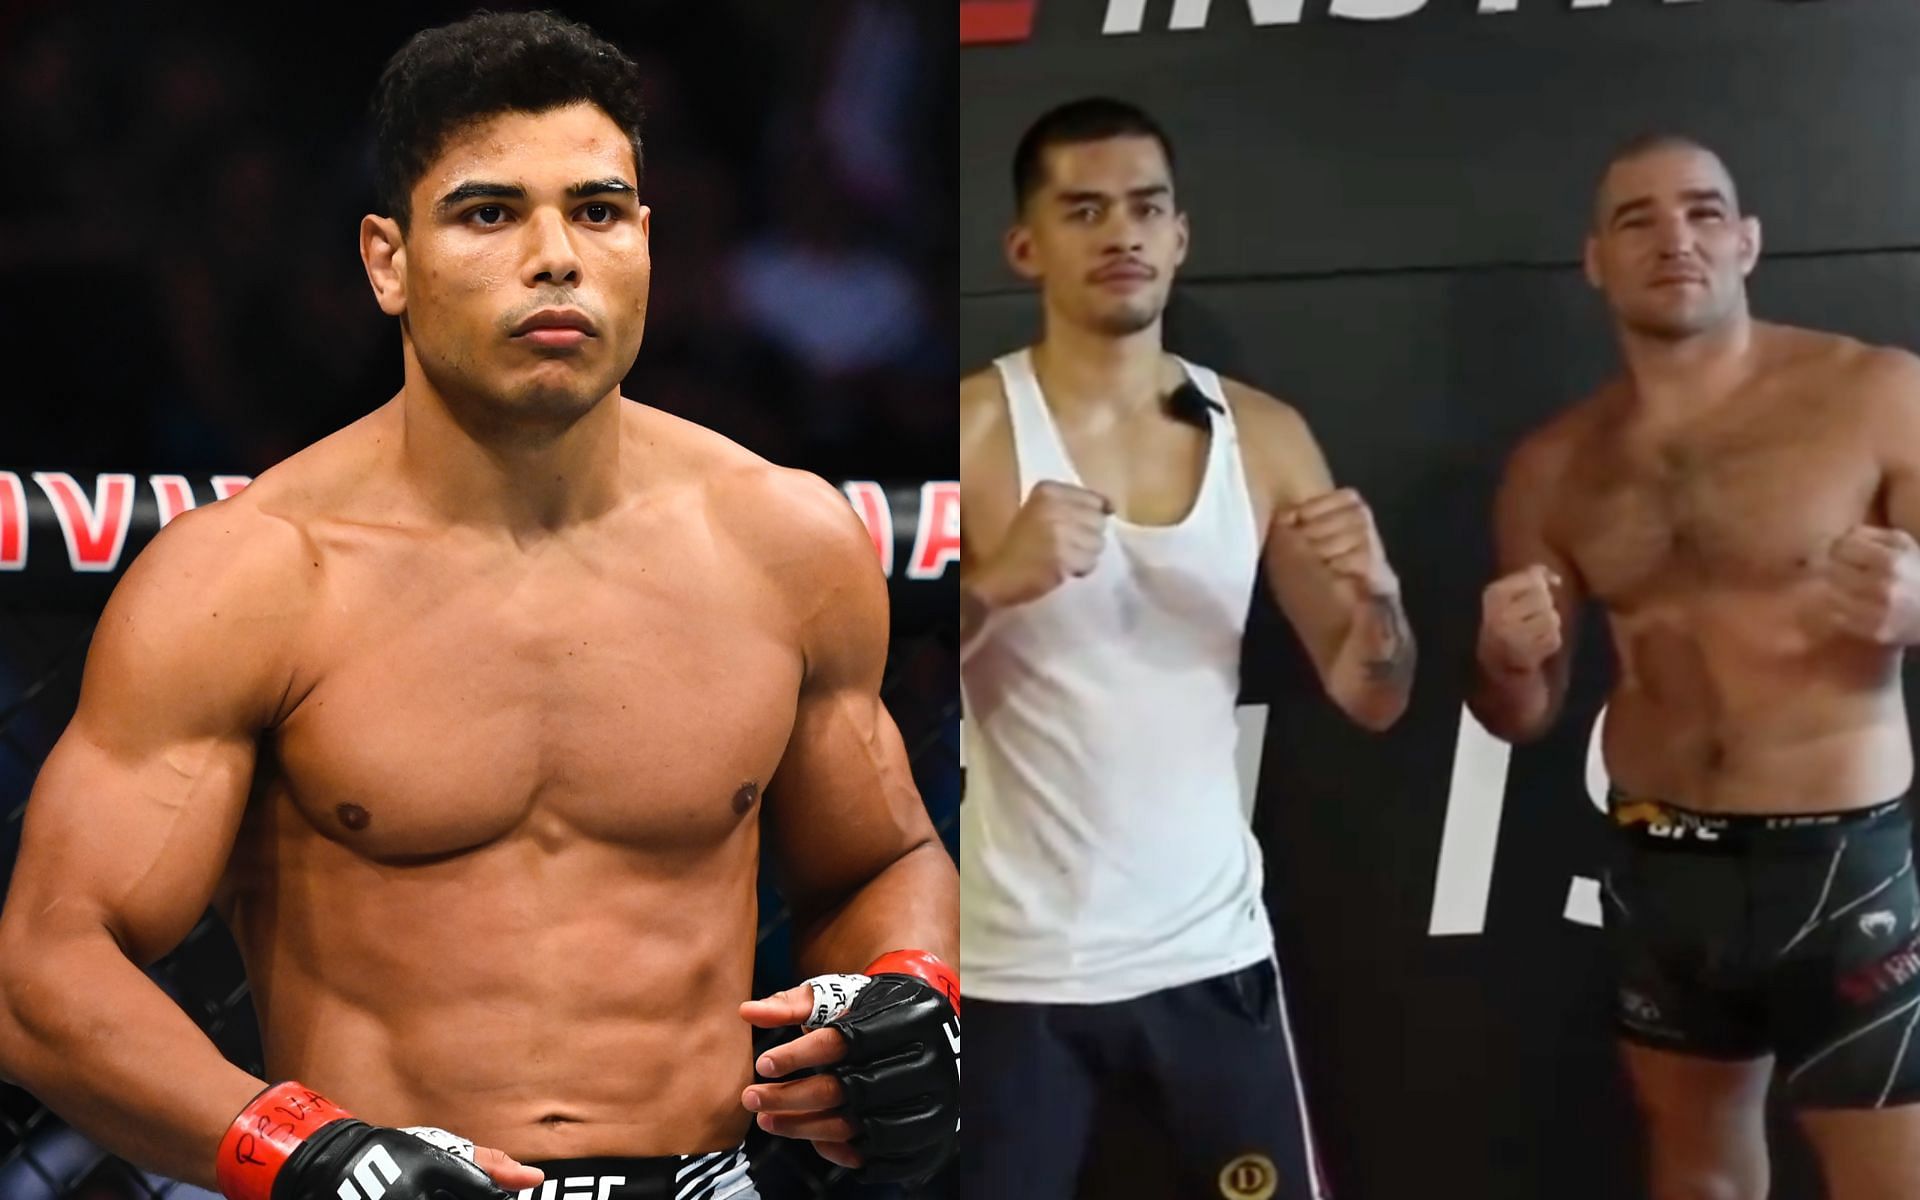 Paulo Costa (left) offers to avenge Sneako for Sean Strickland